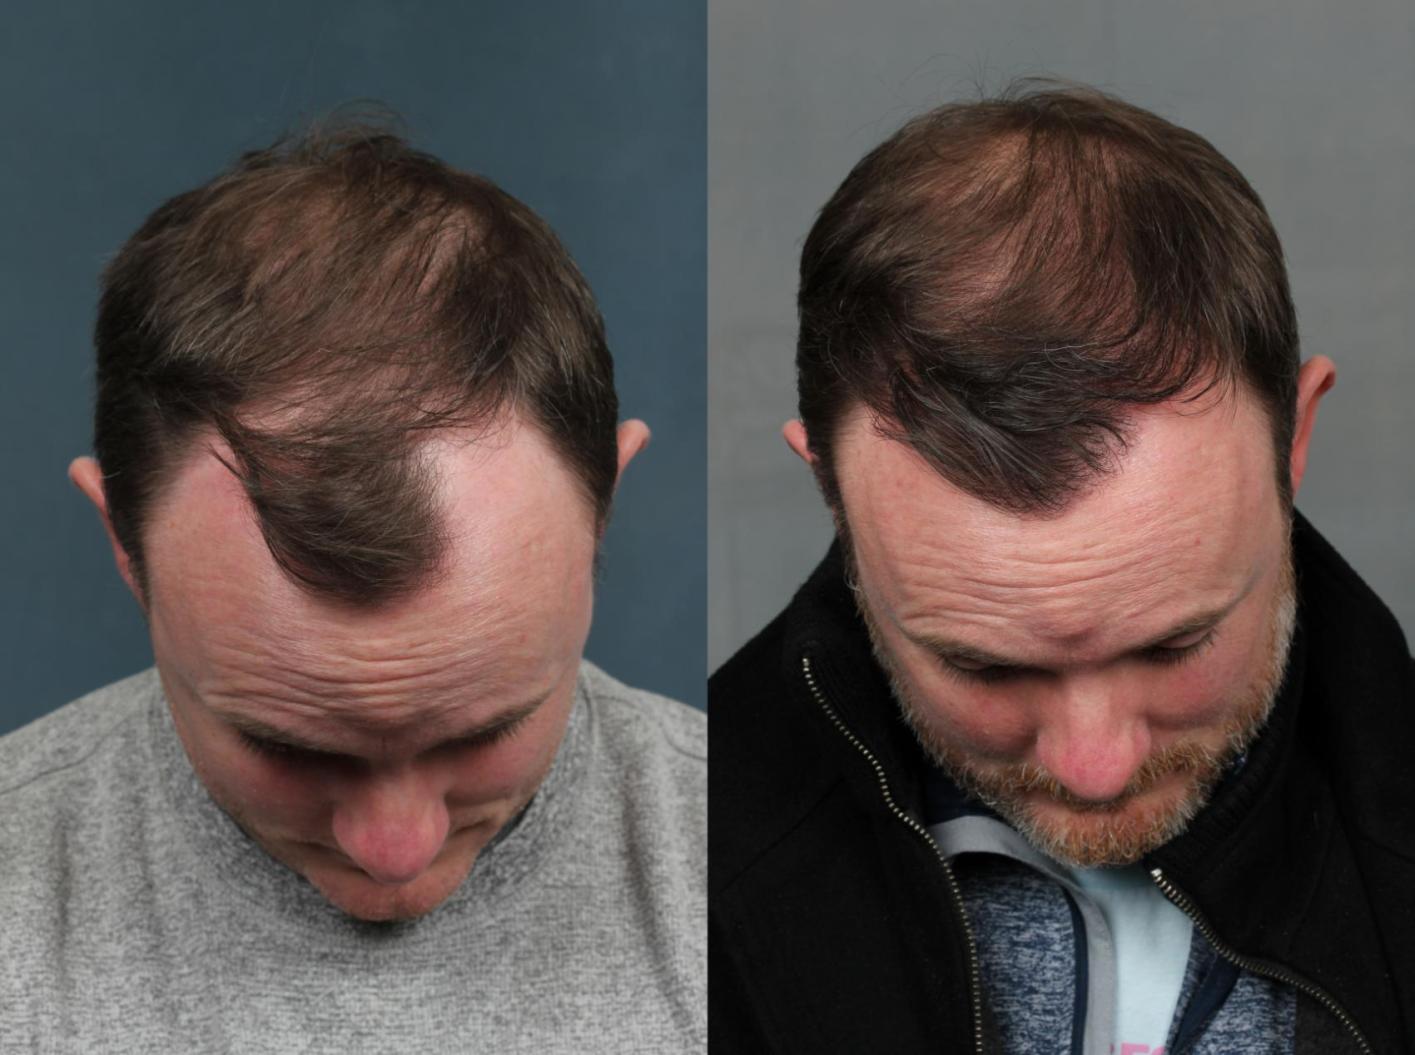 What Are the Alternatives to Finasteride for Hair Transplants?